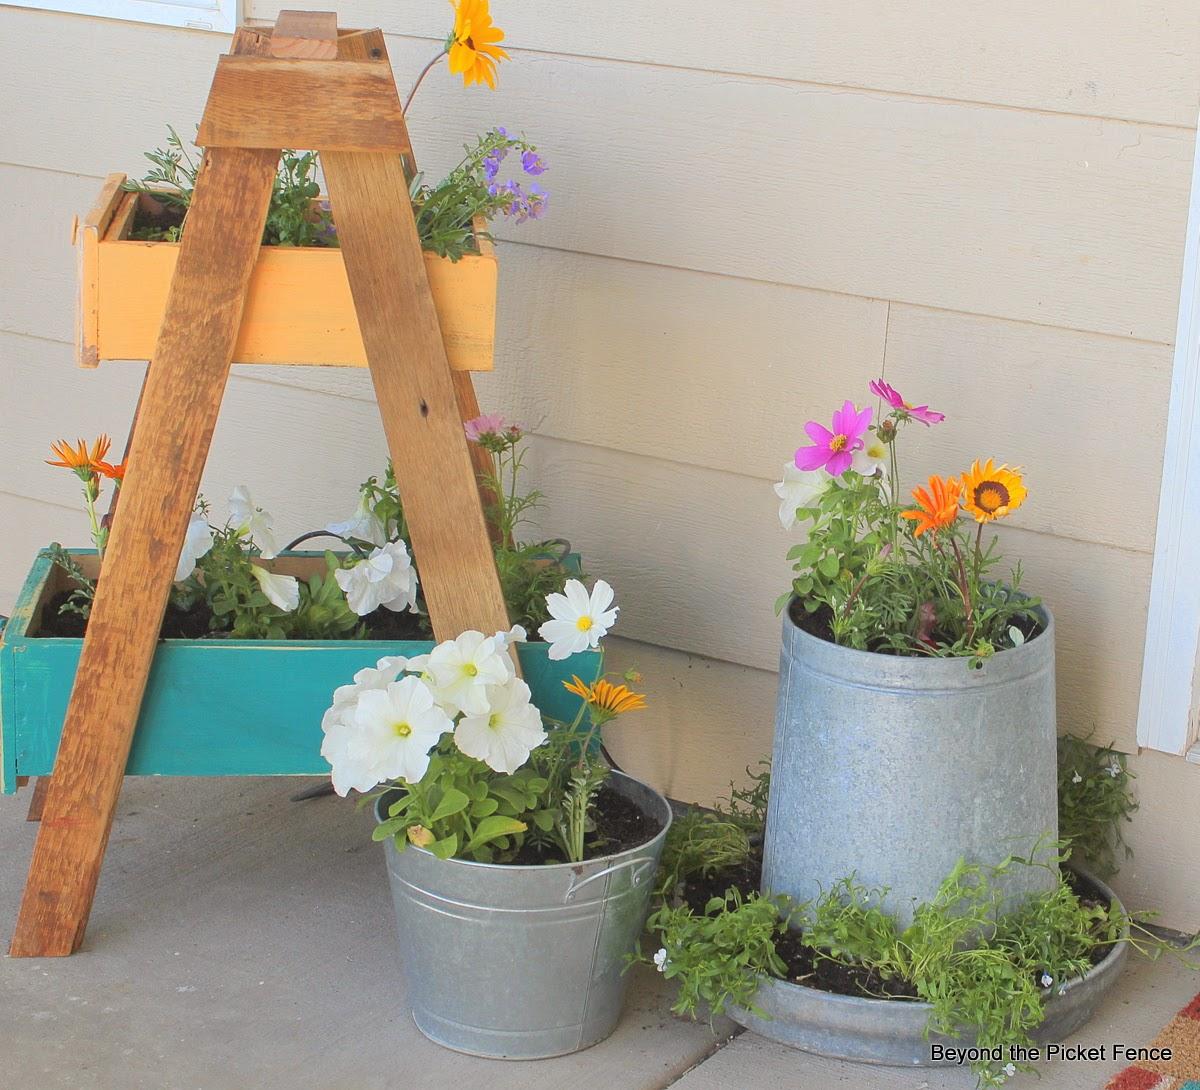 Re-Purpose Your Defective Drawers Into Layered Planters.